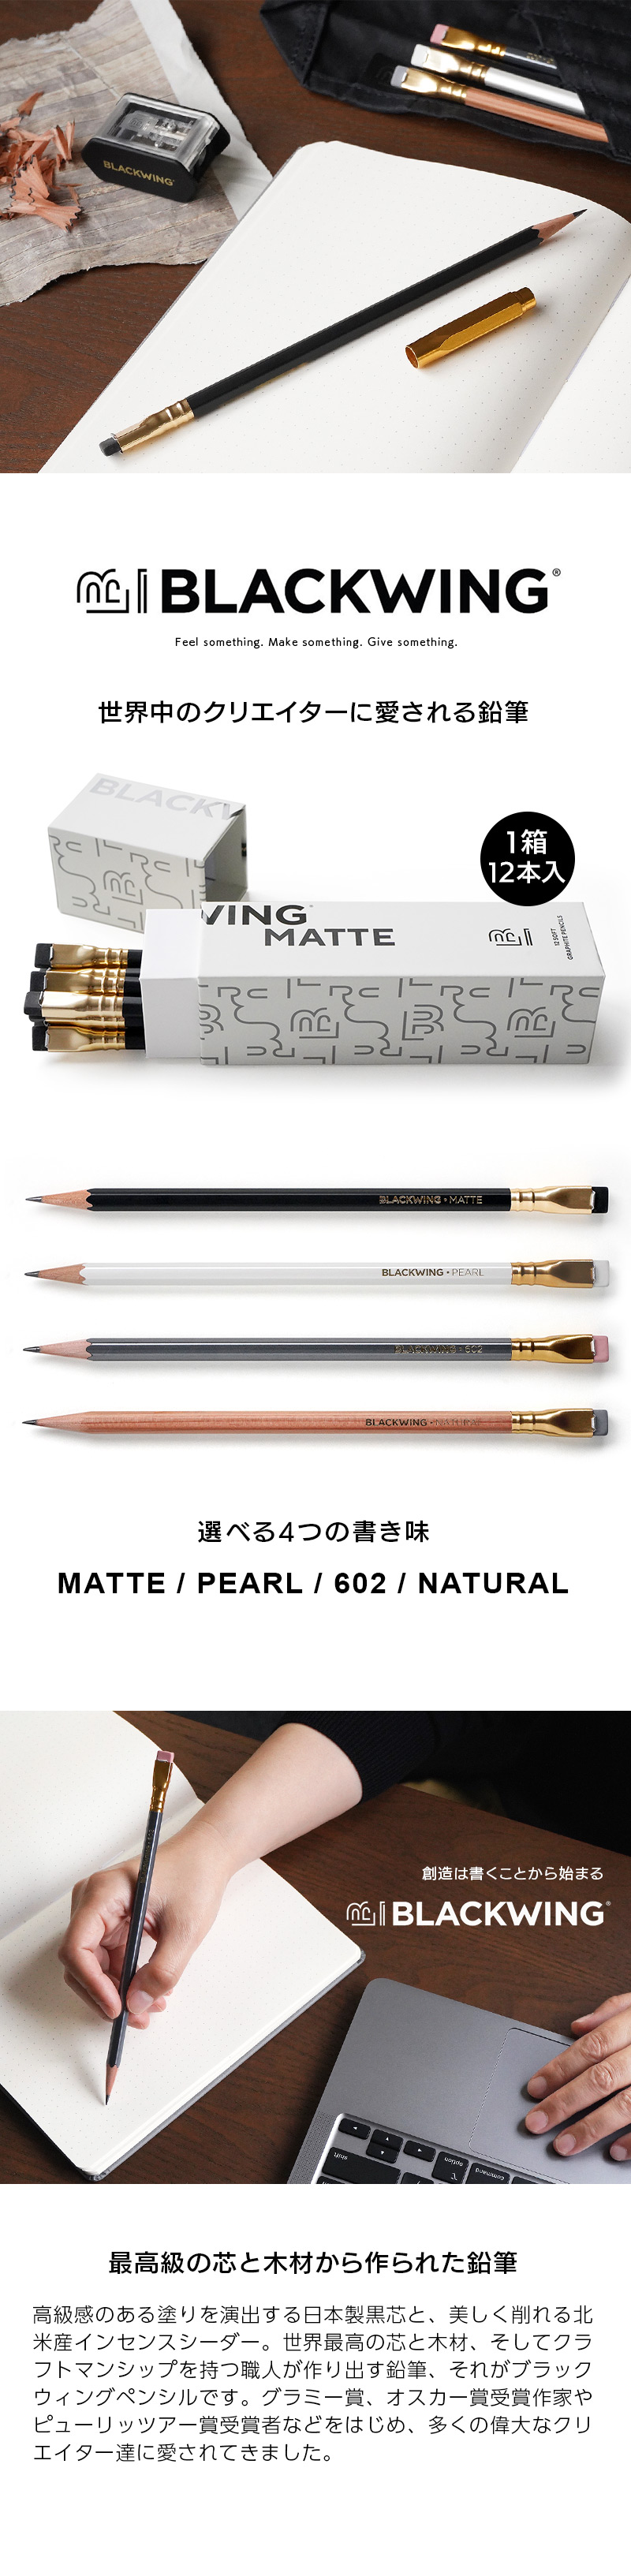 BLACKWING 鉛筆 1箱 12本入り MATTE / PEARL / 602 / NATURAL